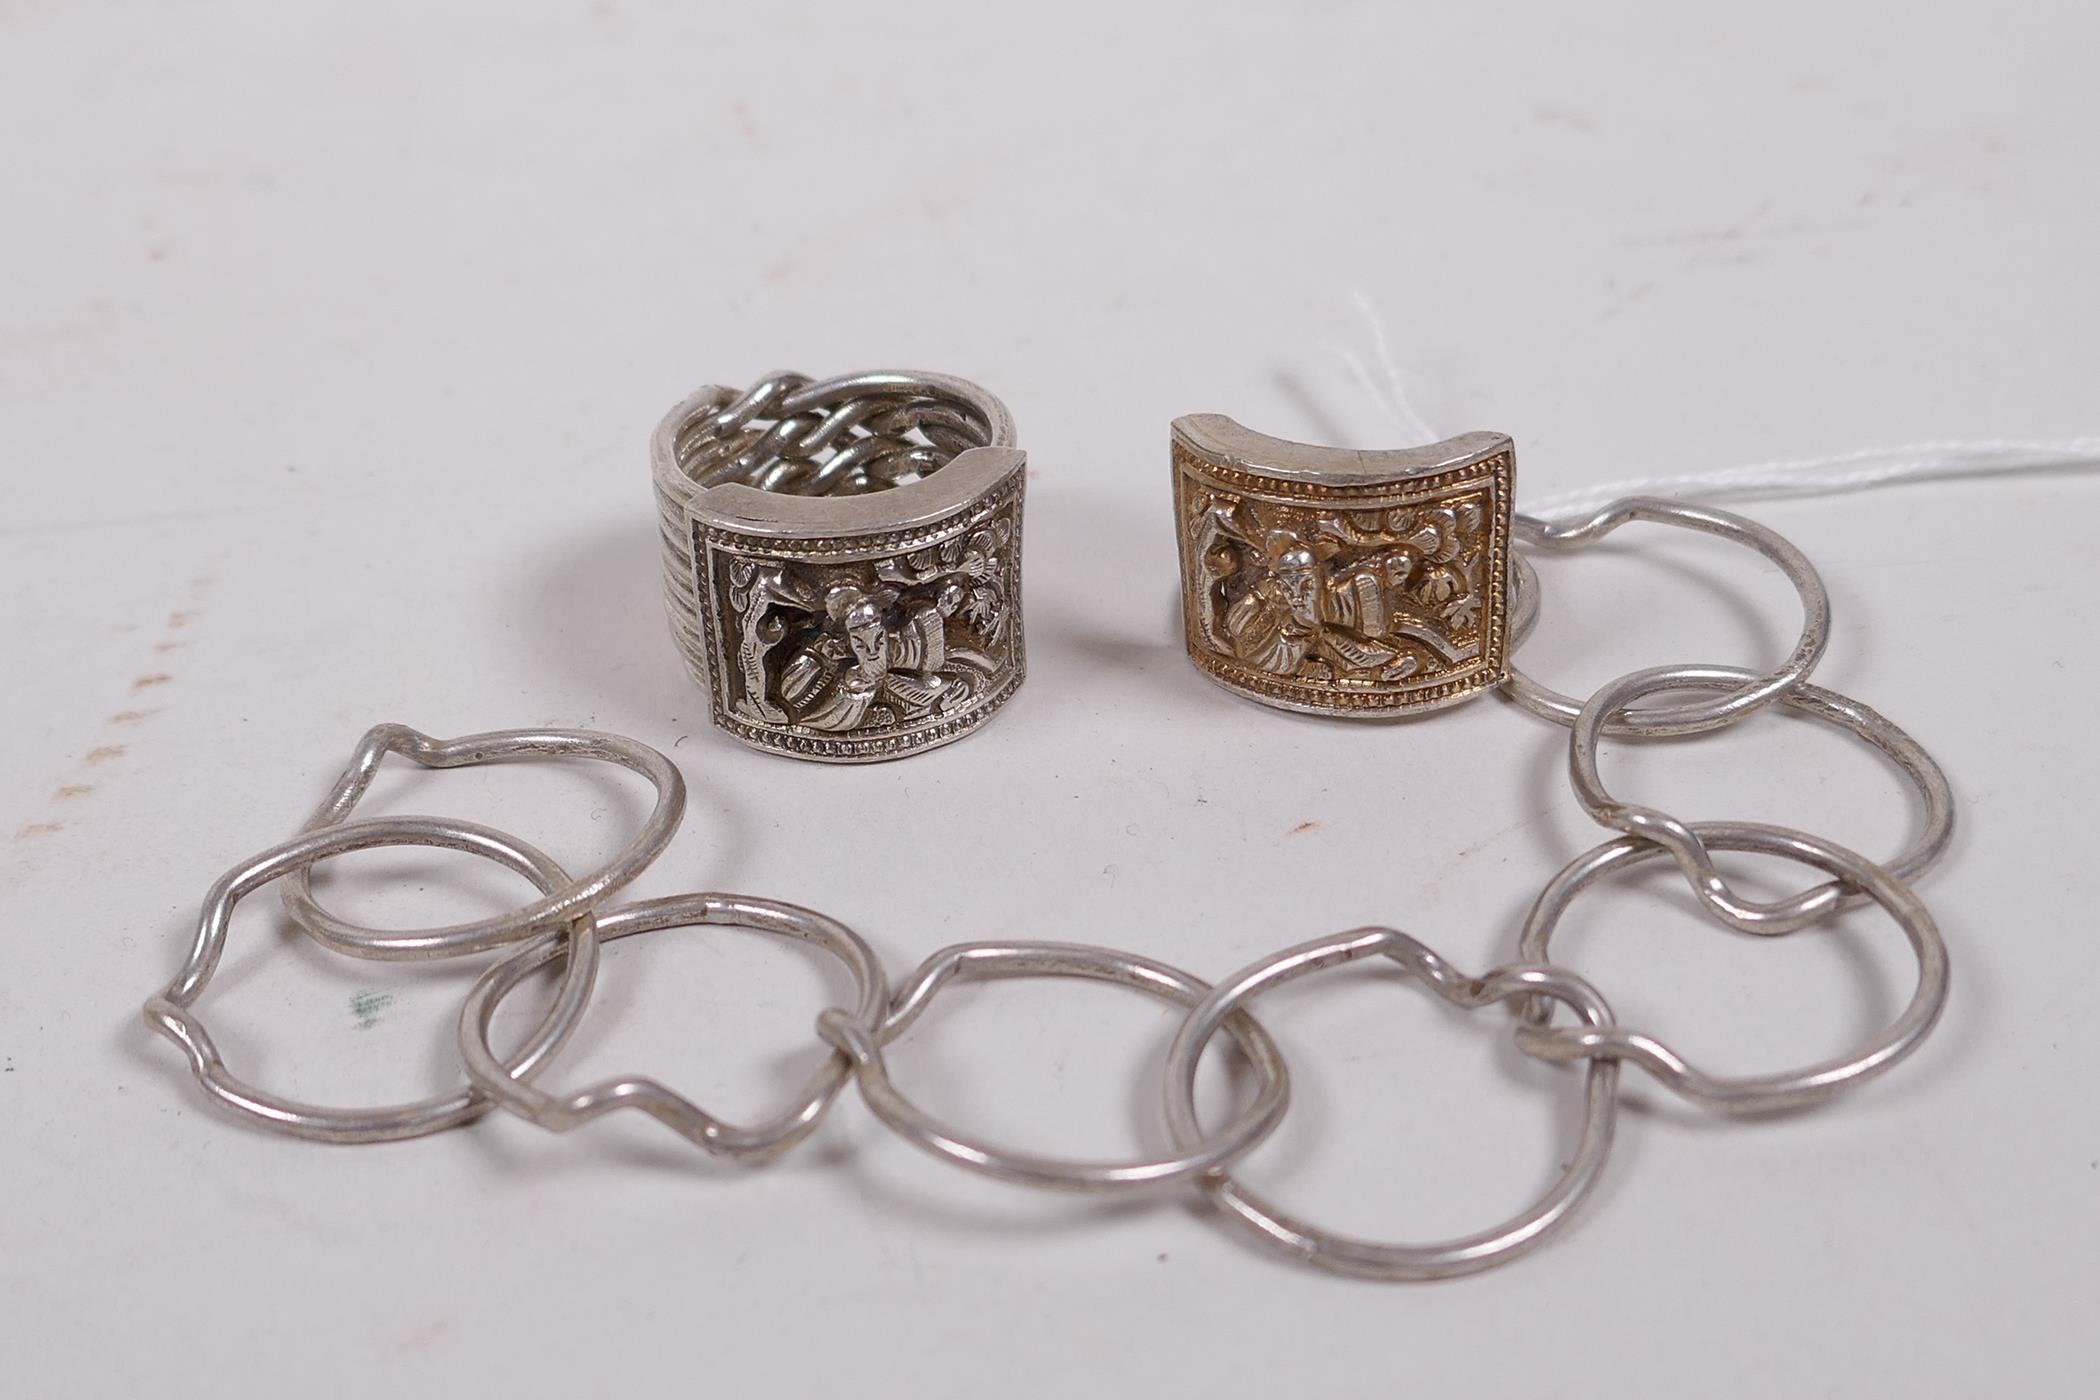 Two Chinese white metal nine link rings, with repousse decoration of a sage